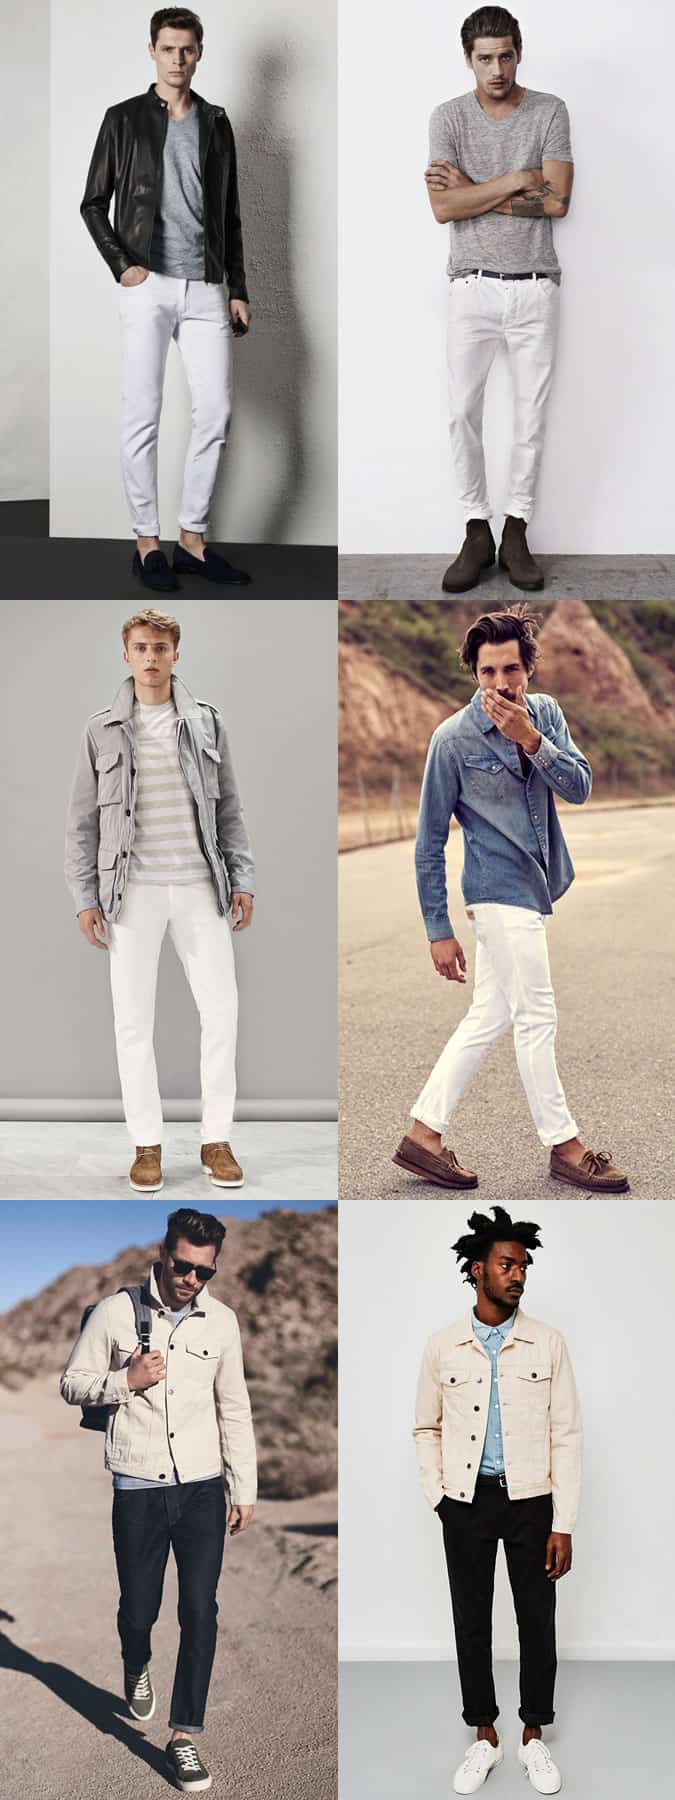 Men's White Jeans Outfit Inspiration Lookbook